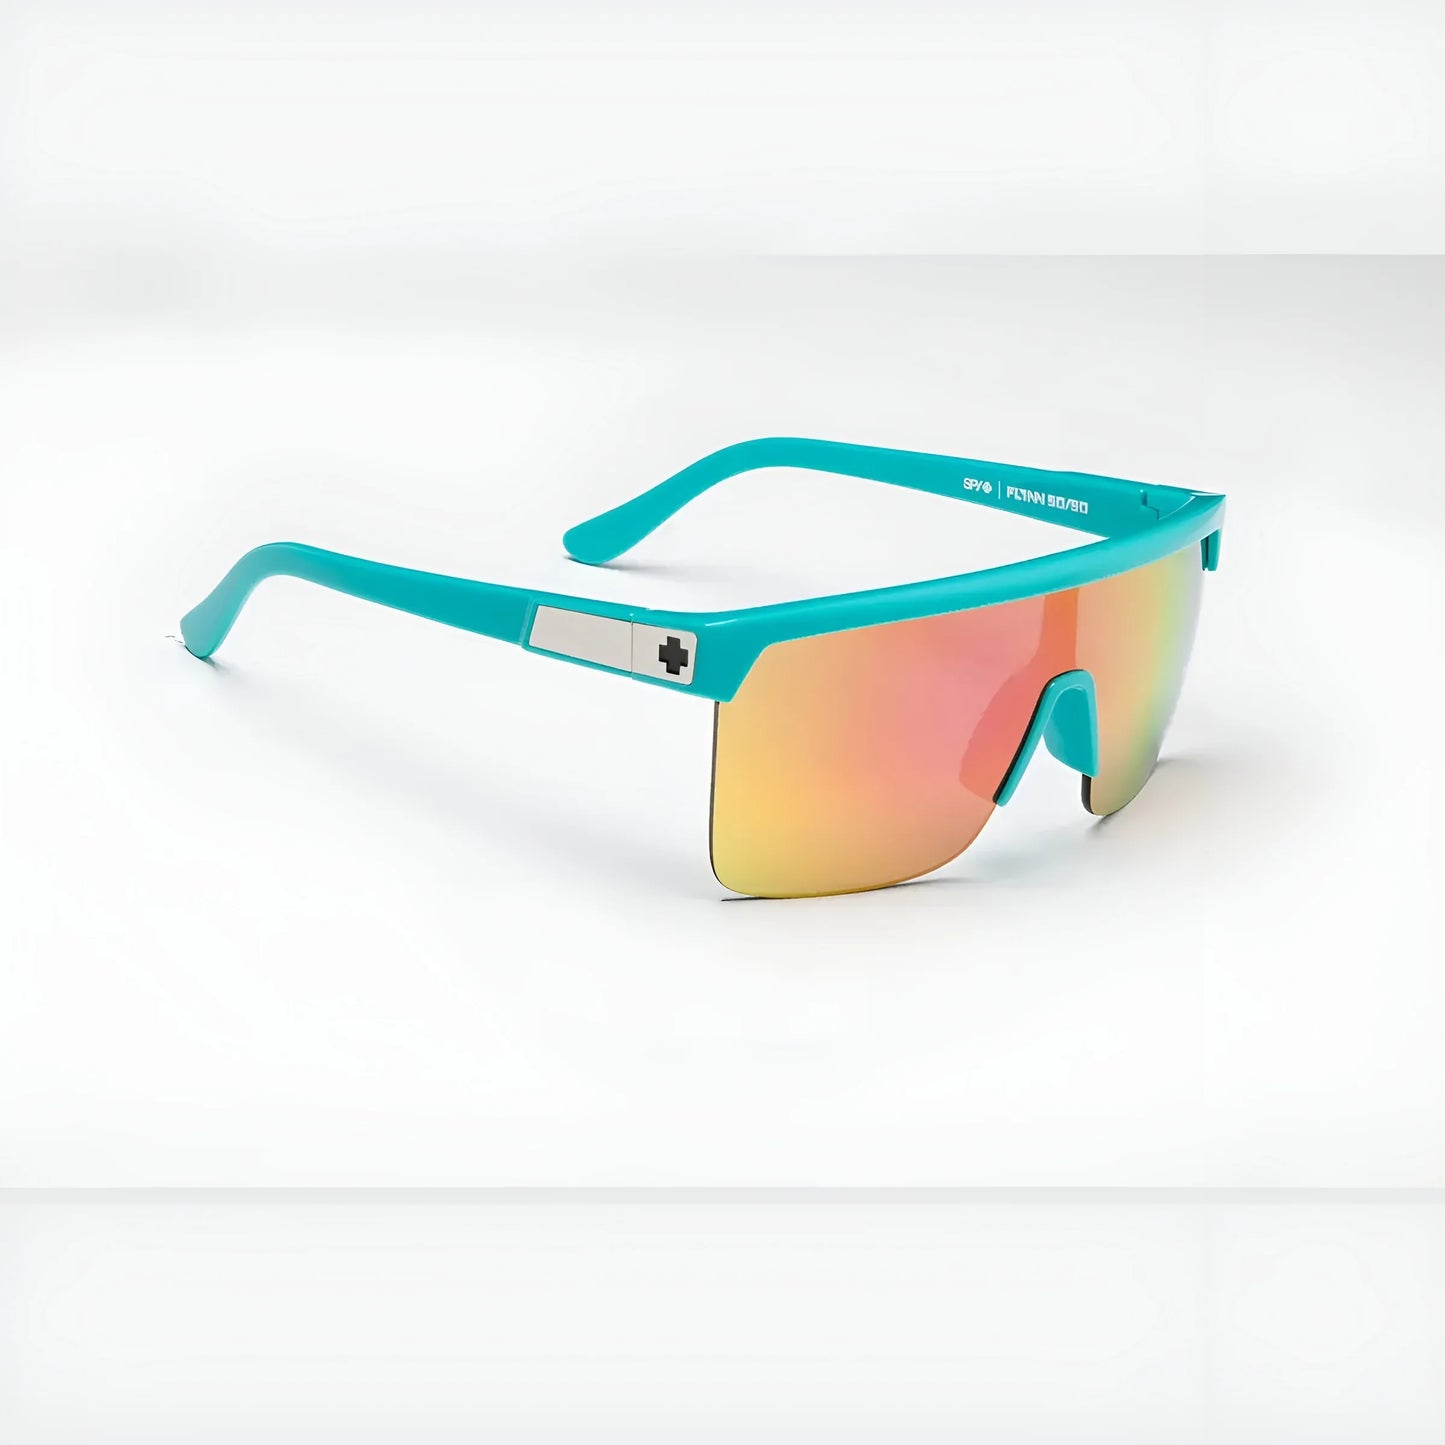 SPY FLYNN 50/50 Sunglasses Teal / HD Plus Grey Green with Pink Spectra Mirror